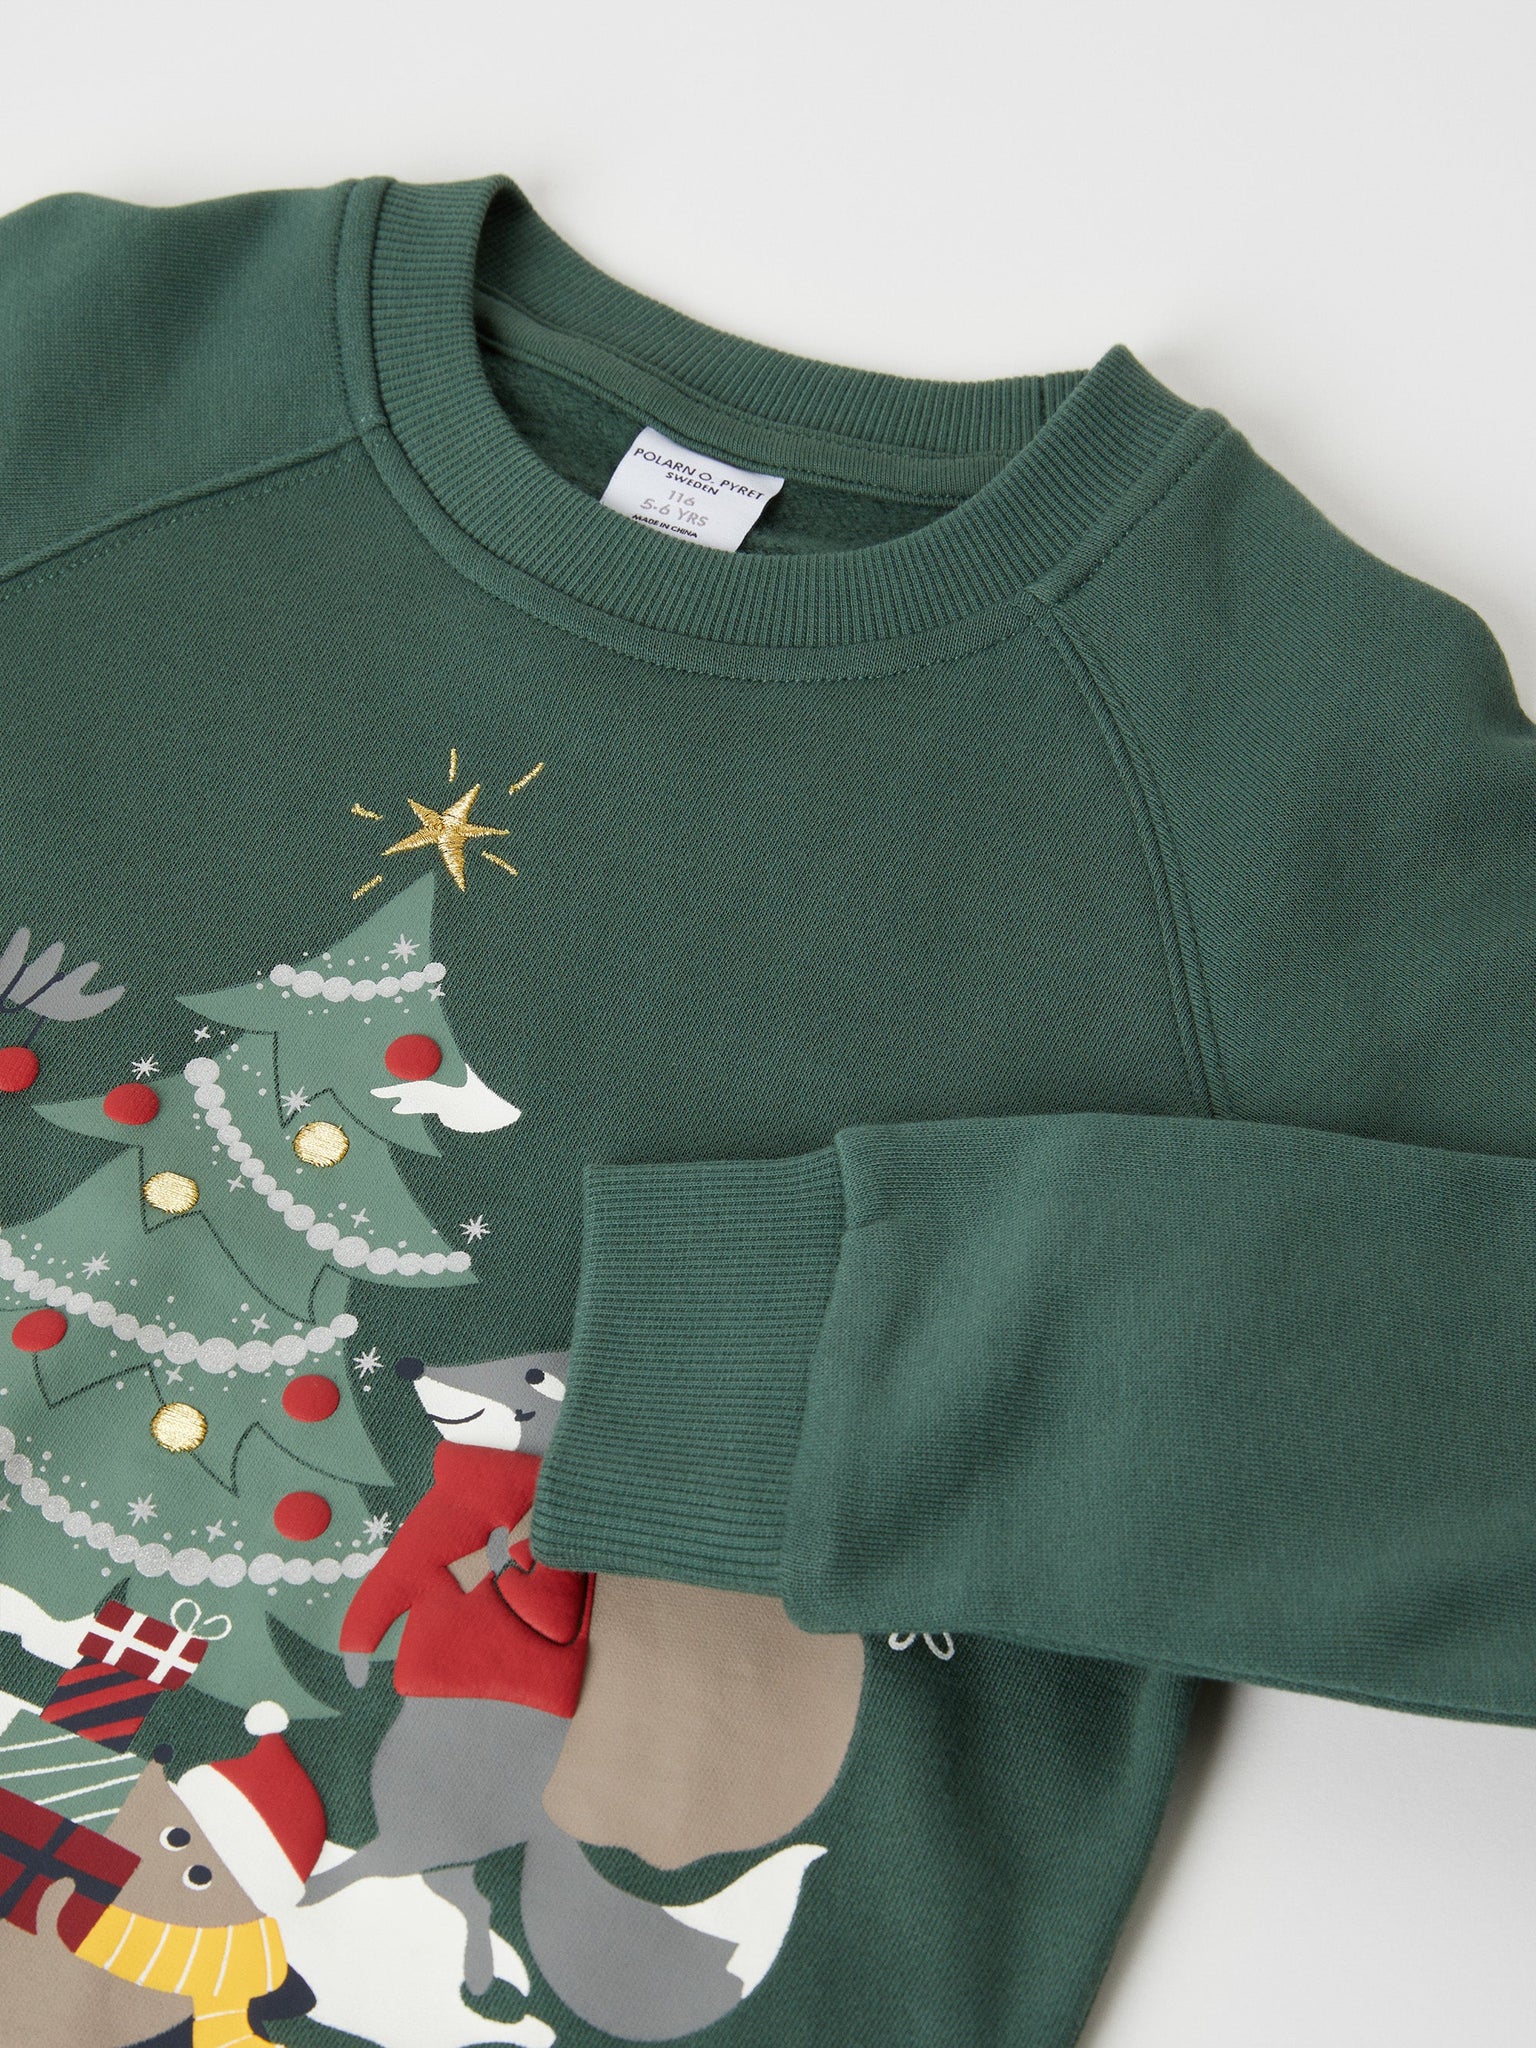 Cotton Kids Christmas Sweatshirt from the Polarn O. Pyret kidswear collection. The best ethical kids clothes